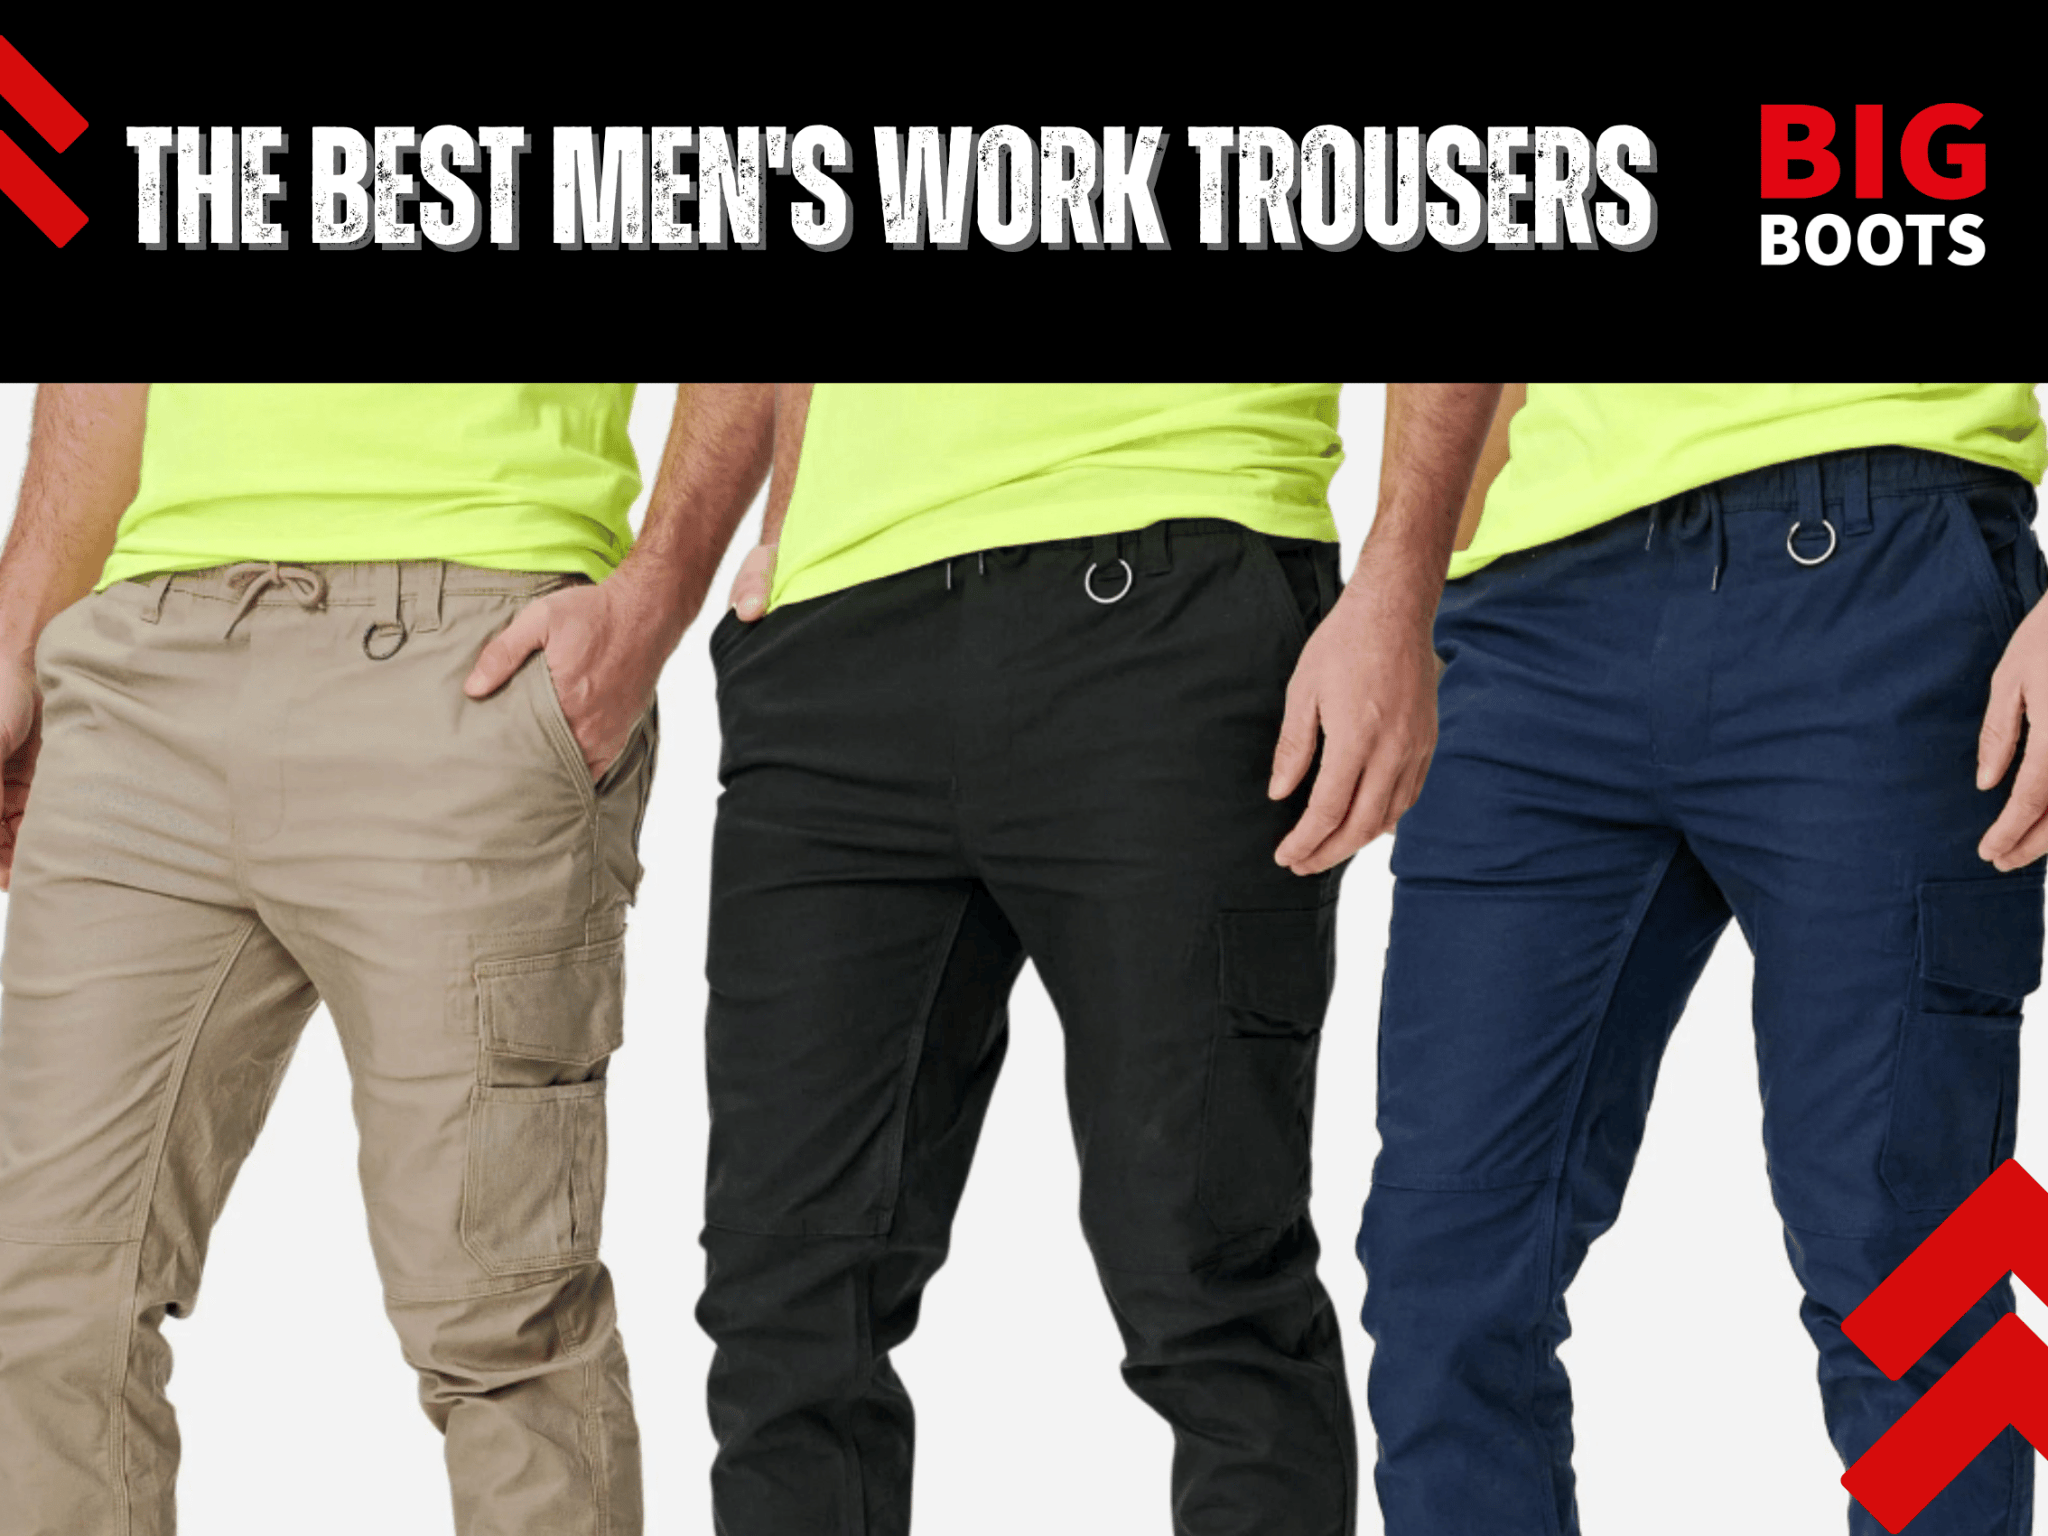 Fristads Trousers 2075 Aths - Work Trousers - Workwear - Best Workwear